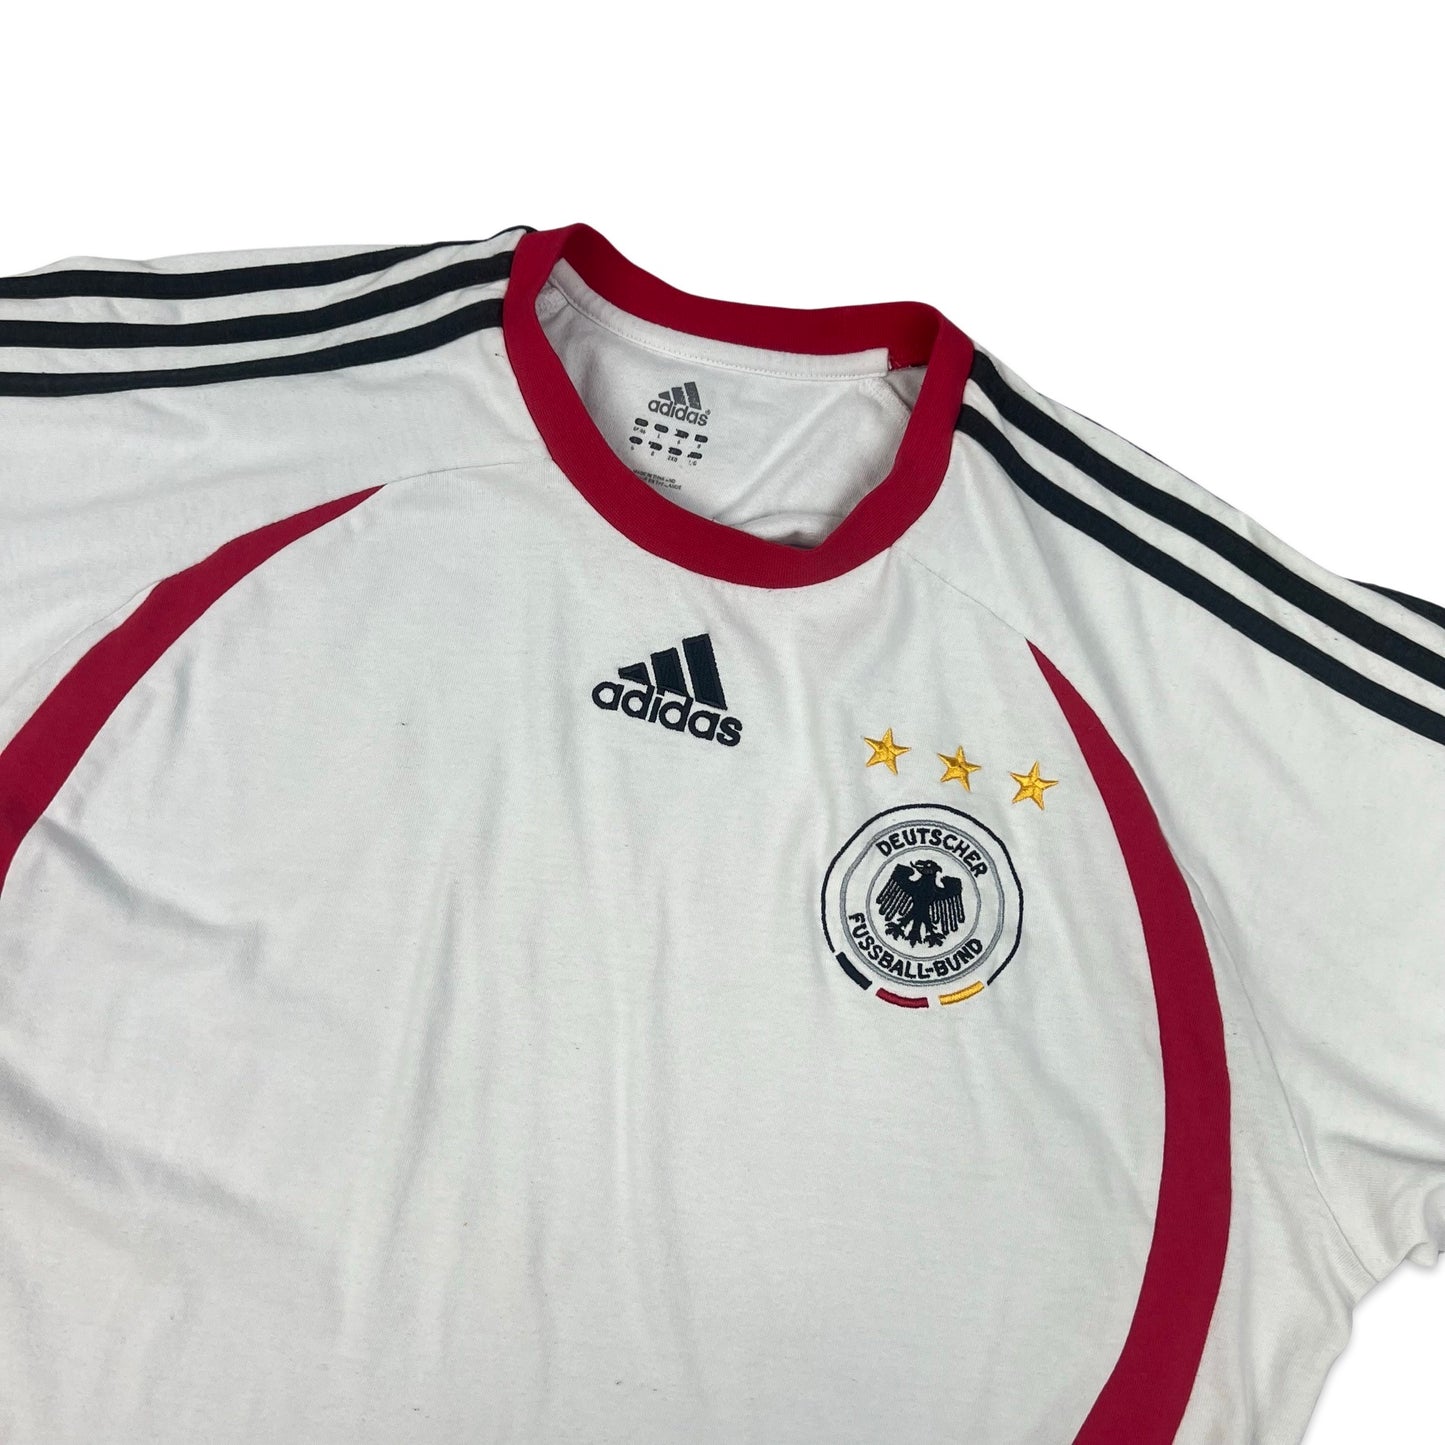 Adidas Germany Football White & Red Tee M L